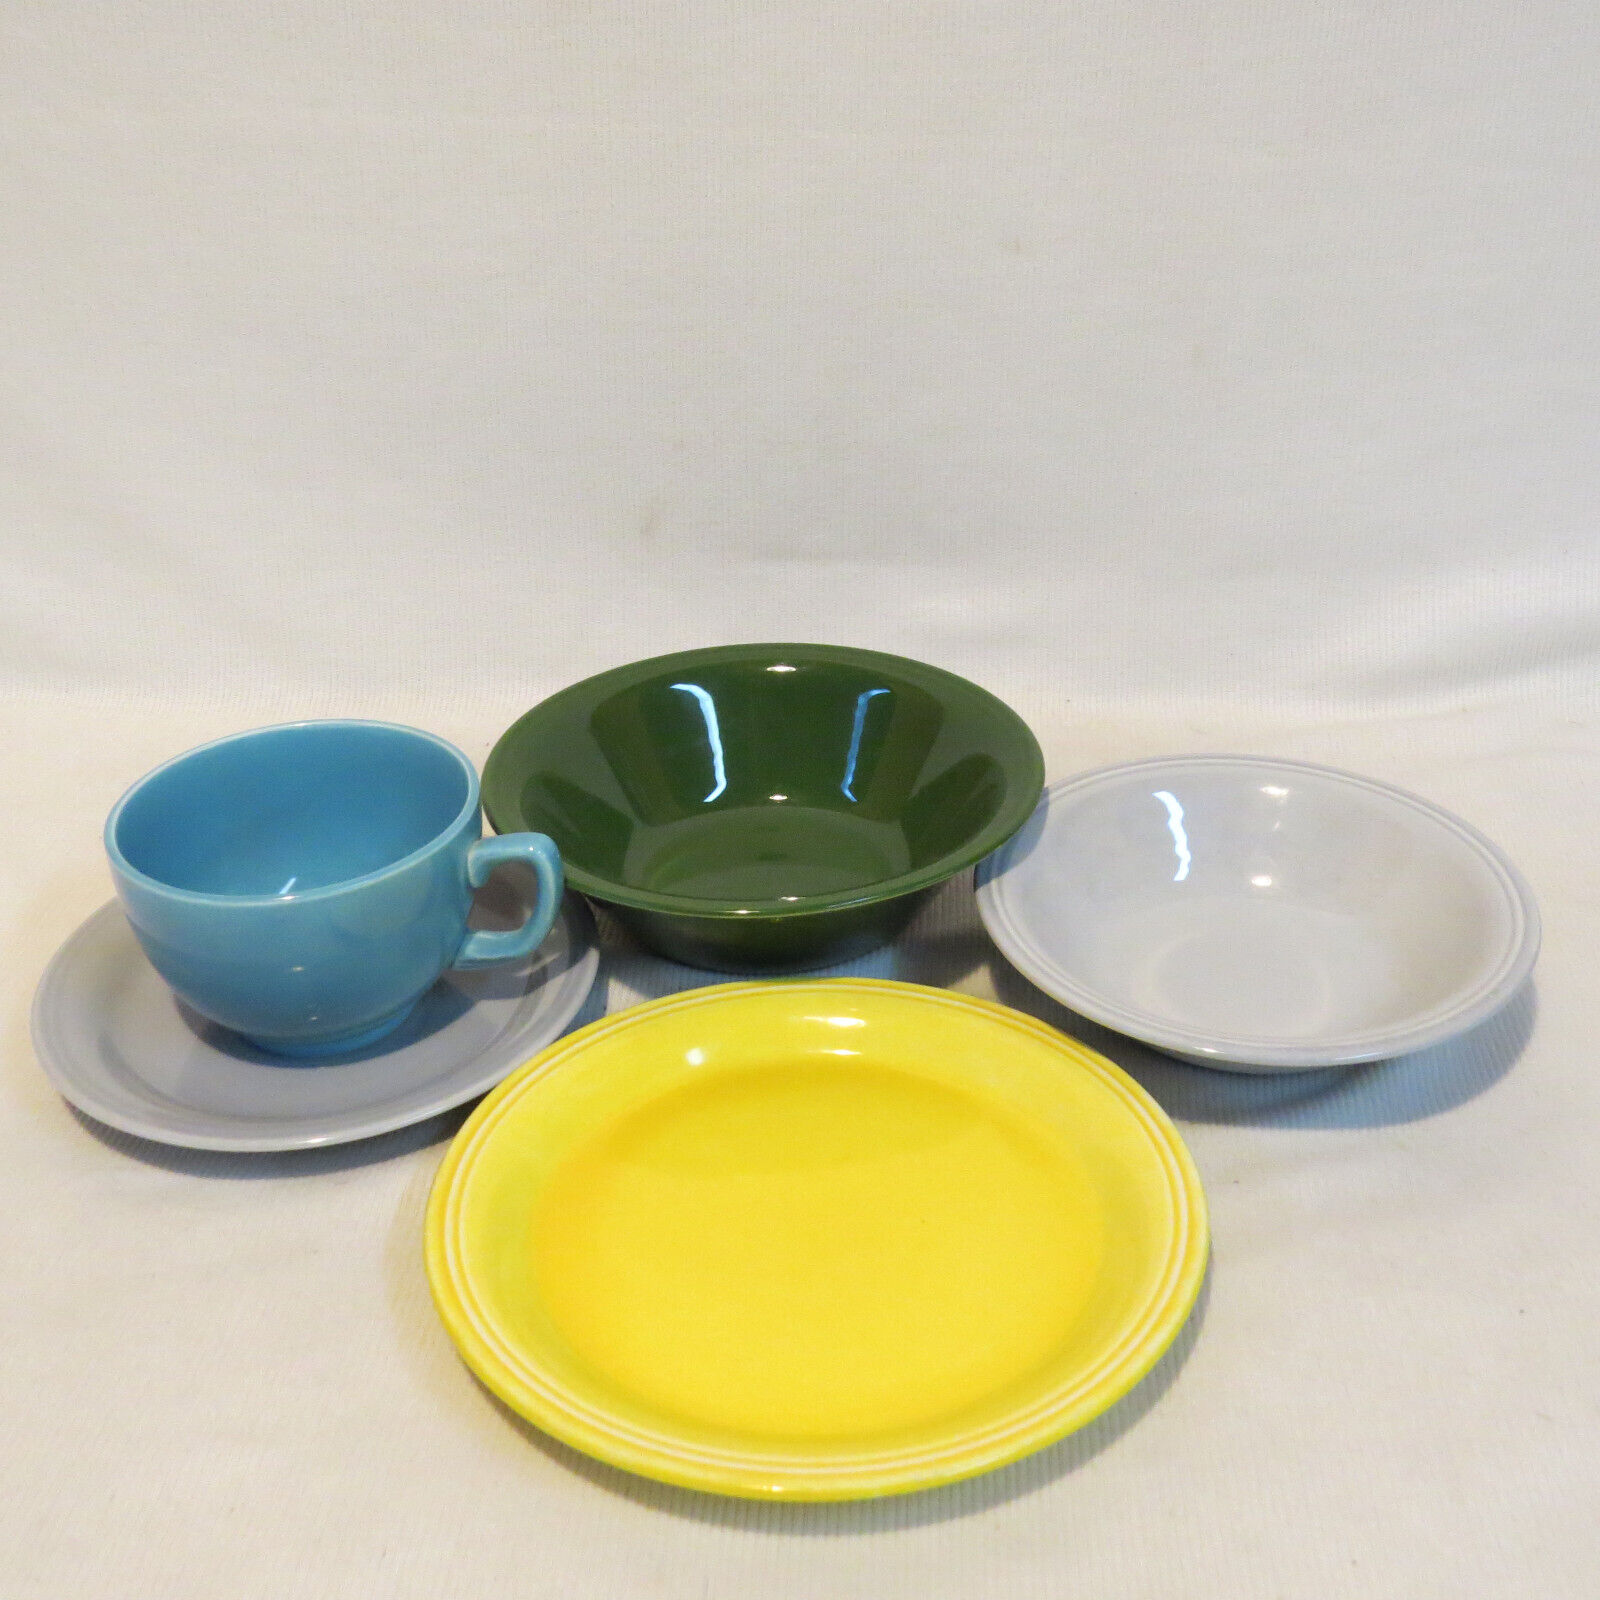 Lot 5 Laughlin Mothers Carnival Oats 1950s Fiesta® Colors Cup Saucer Plate Bowls